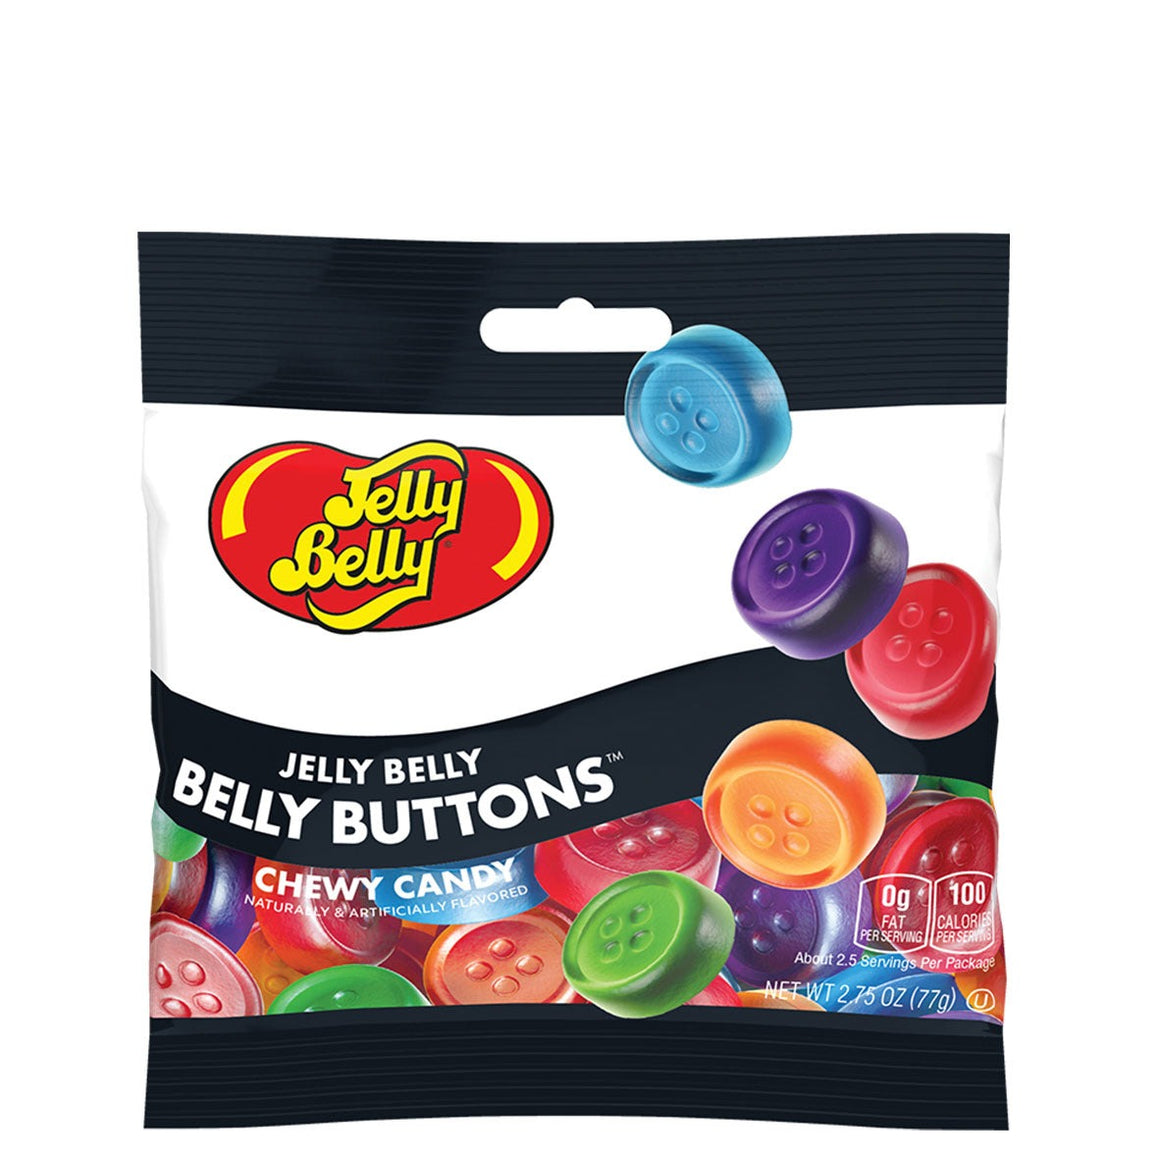 All City Candy Jelly Belly Belly Buttons 2.75 oz. Bag Jelly Belly For fresh candy and great service, visit www.allcitycandy.com